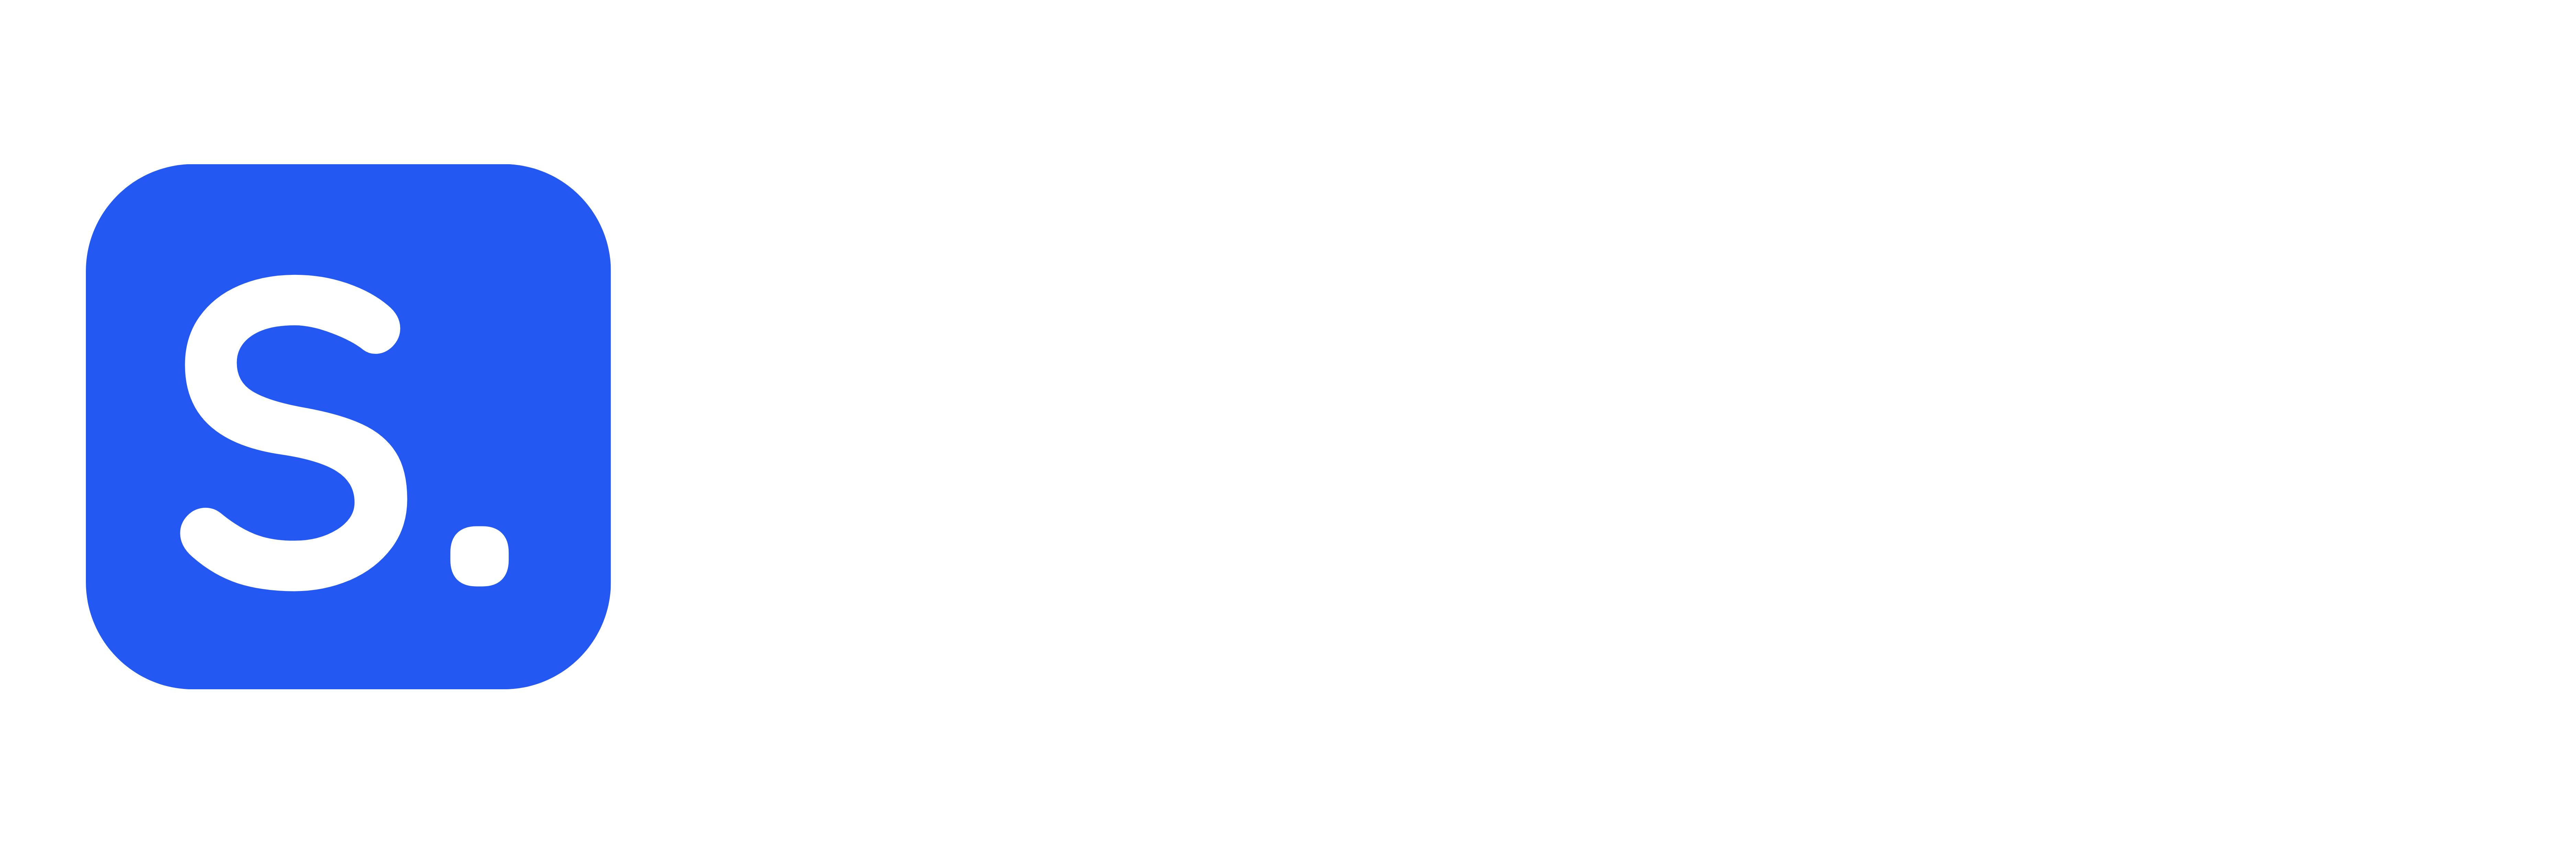 SiteStitch | Onboarding Questionnaire